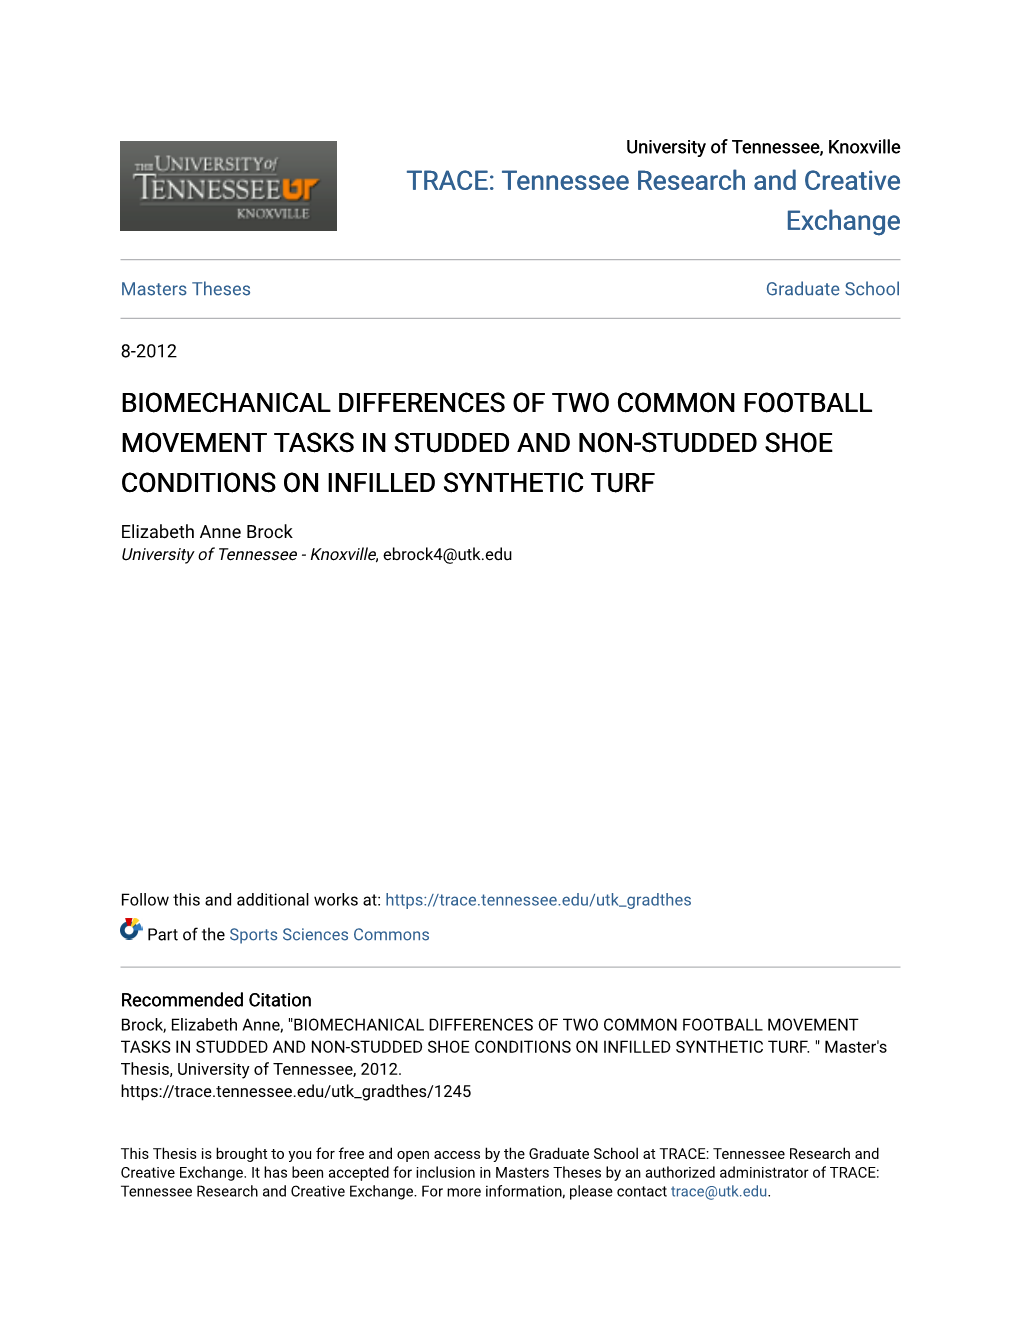 Biomechanical Differences of Two Common Football Movement Tasks in Studded and Non-Studded Shoe Conditions on Infilled Synthetic Turf